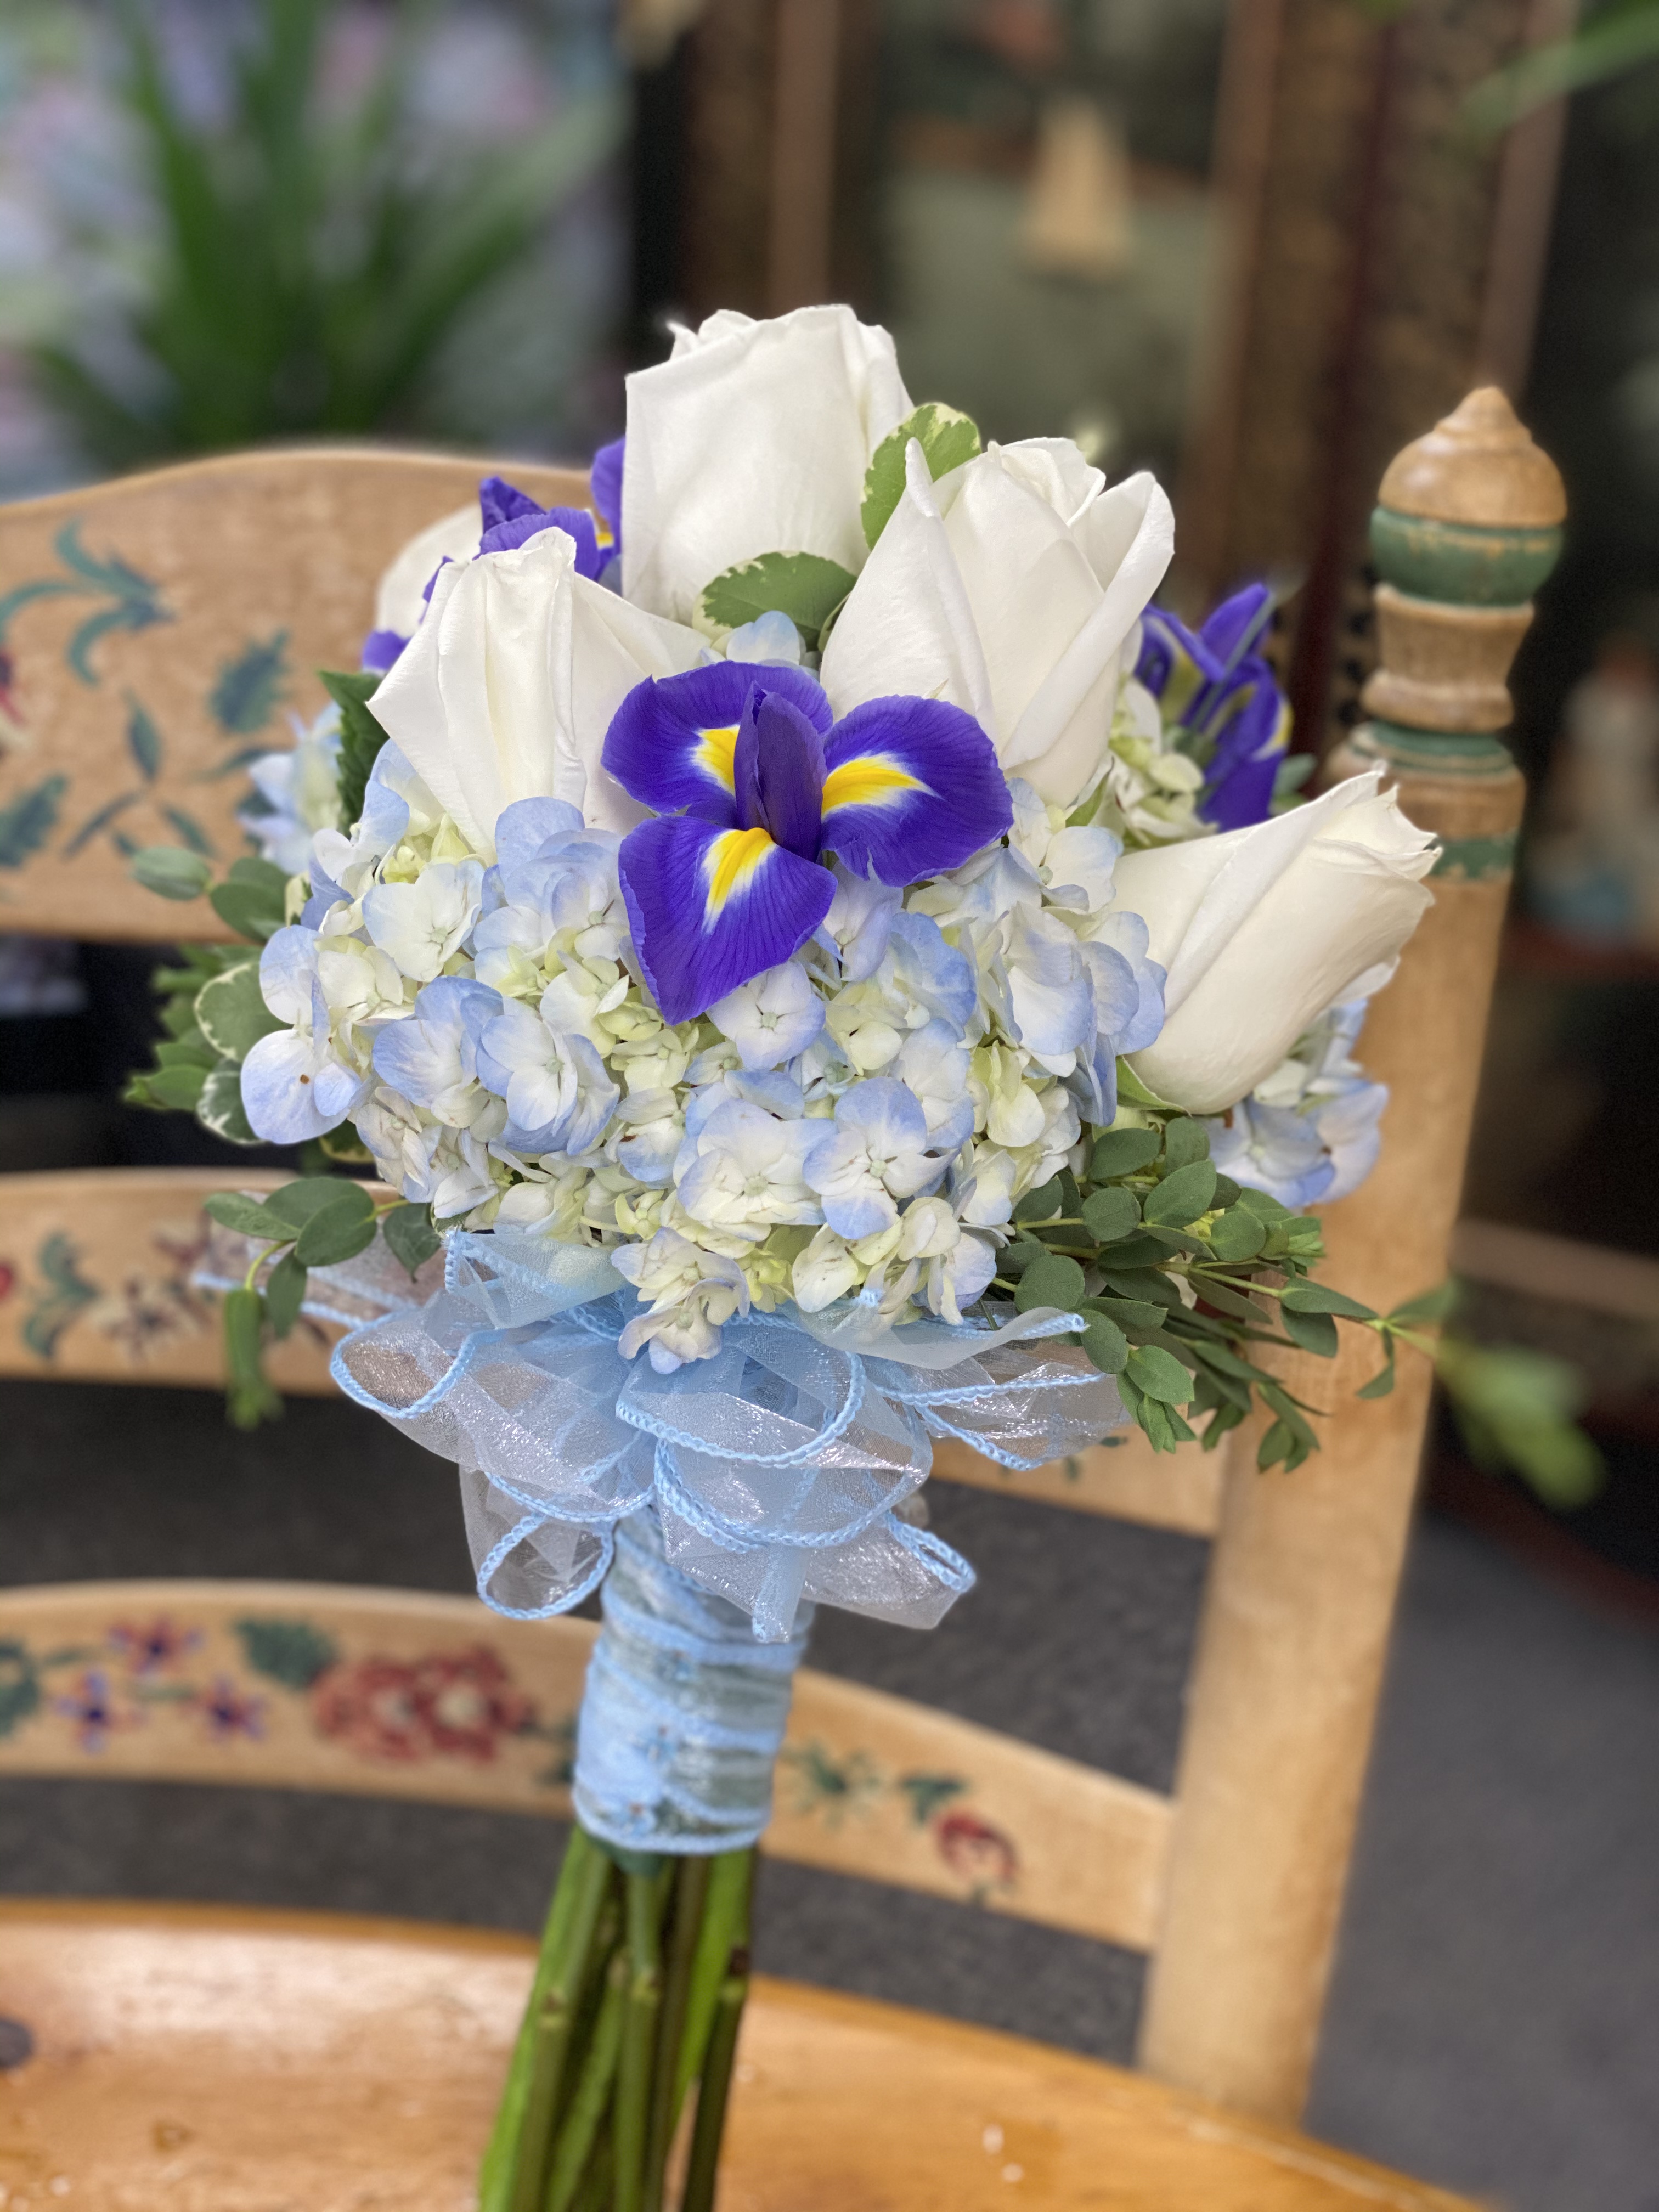 Prom Flowers- Here's some info & photos - Belvedere Flowers of Havertown PA